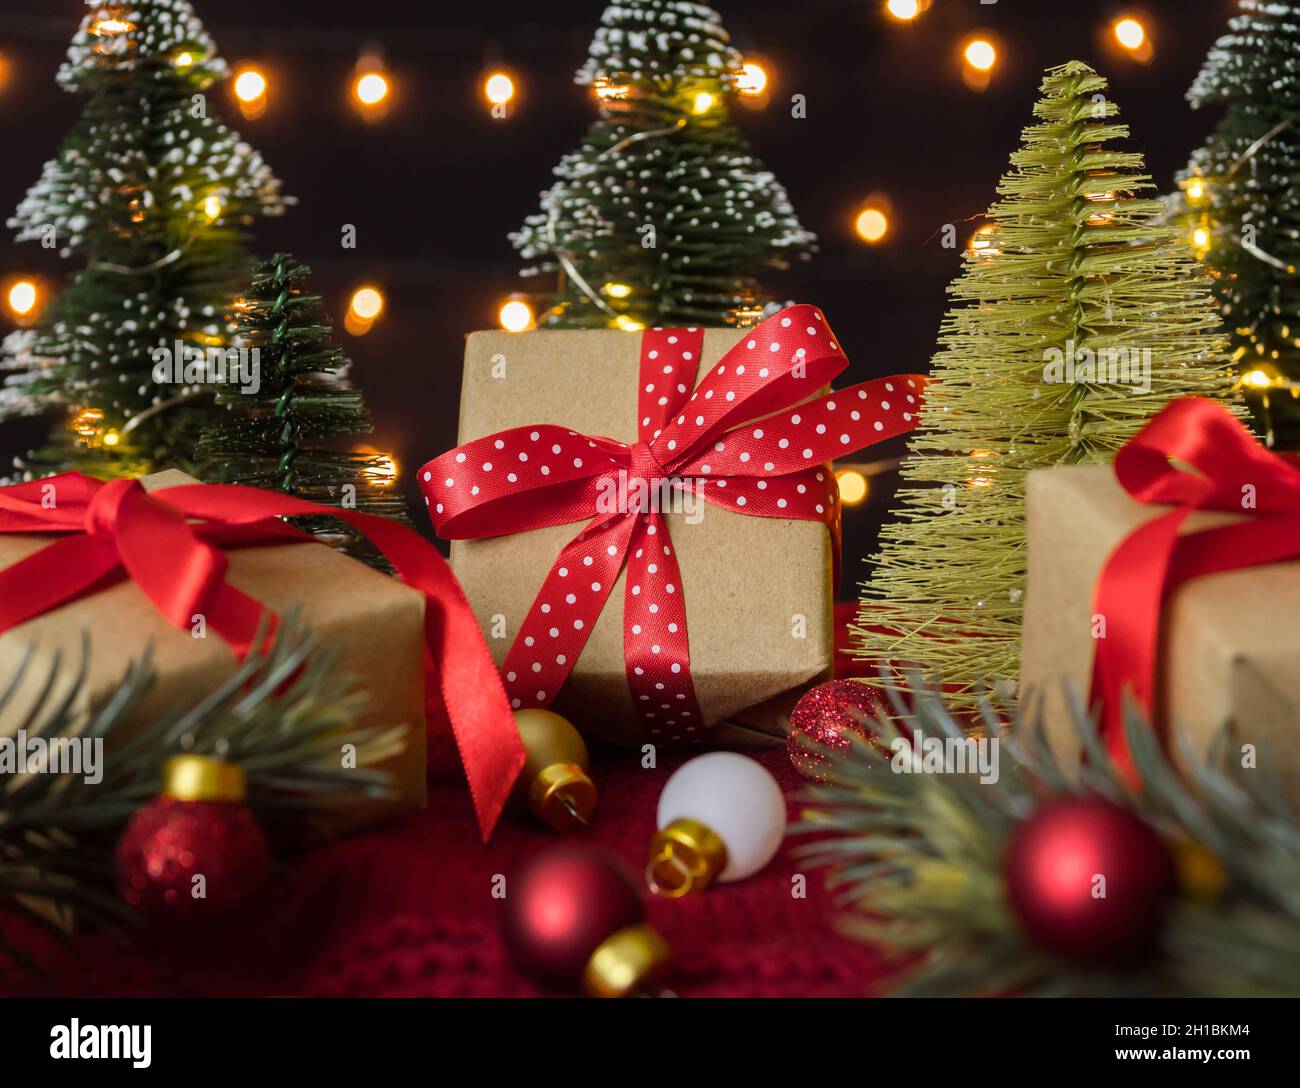 Beautiful gift boxes and decoration for christmas celebrate background. Stock Photo